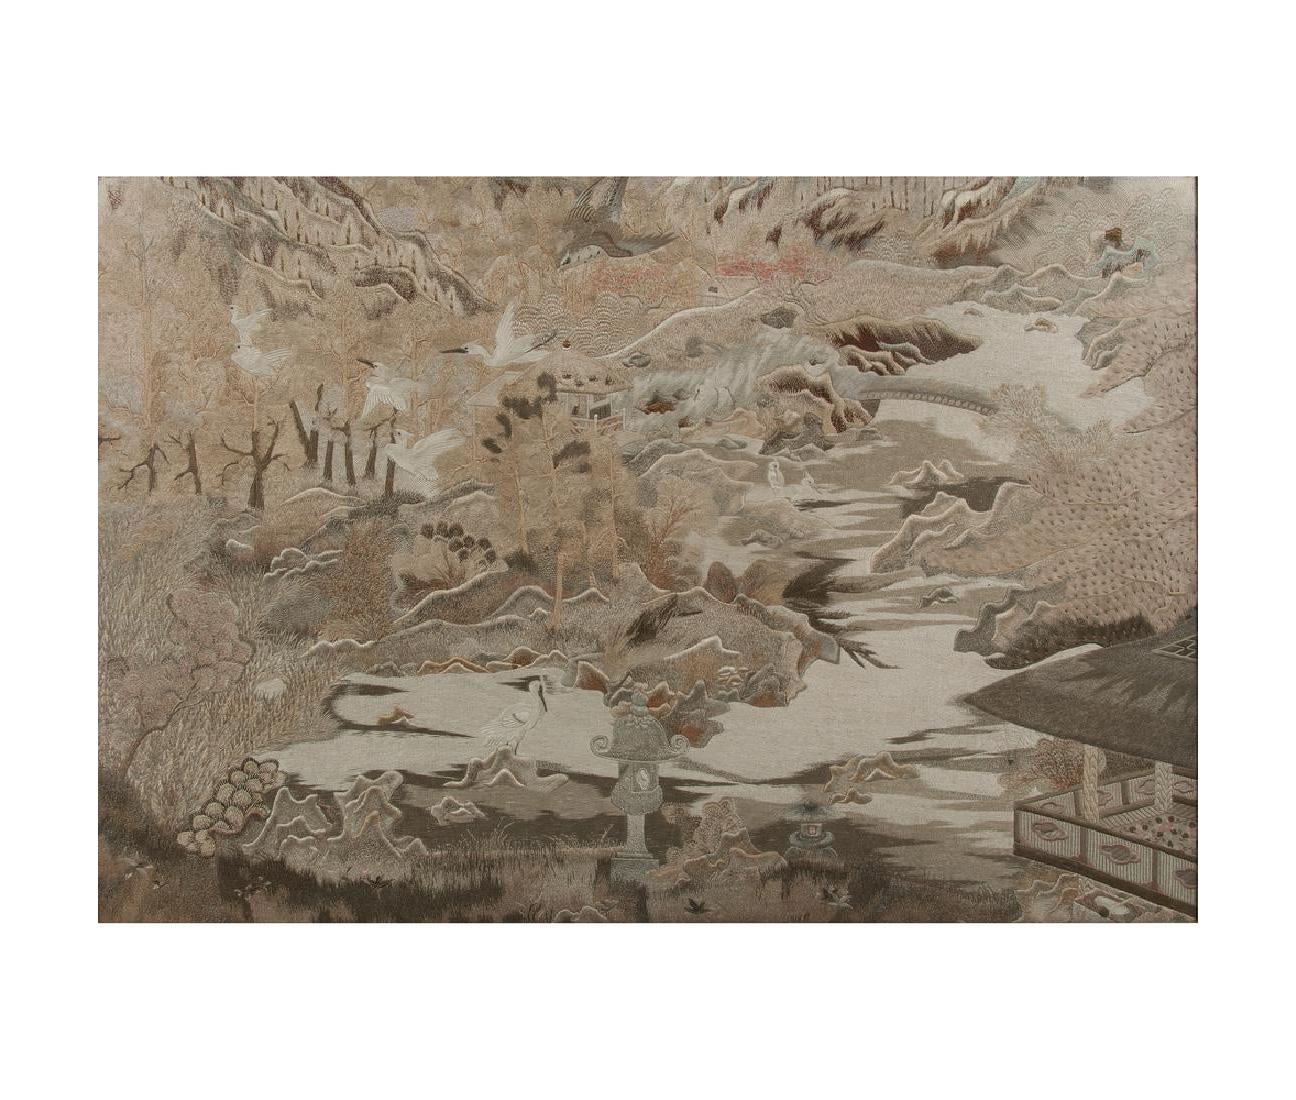 A large and impressive Japanese embroidery tapestry from late Meiji Period. This splendid silk embroidery in stunning technical detail depicts a lake scene nested between rocky hills. Pavilions near and far, stone lantern and wood bridge dot the